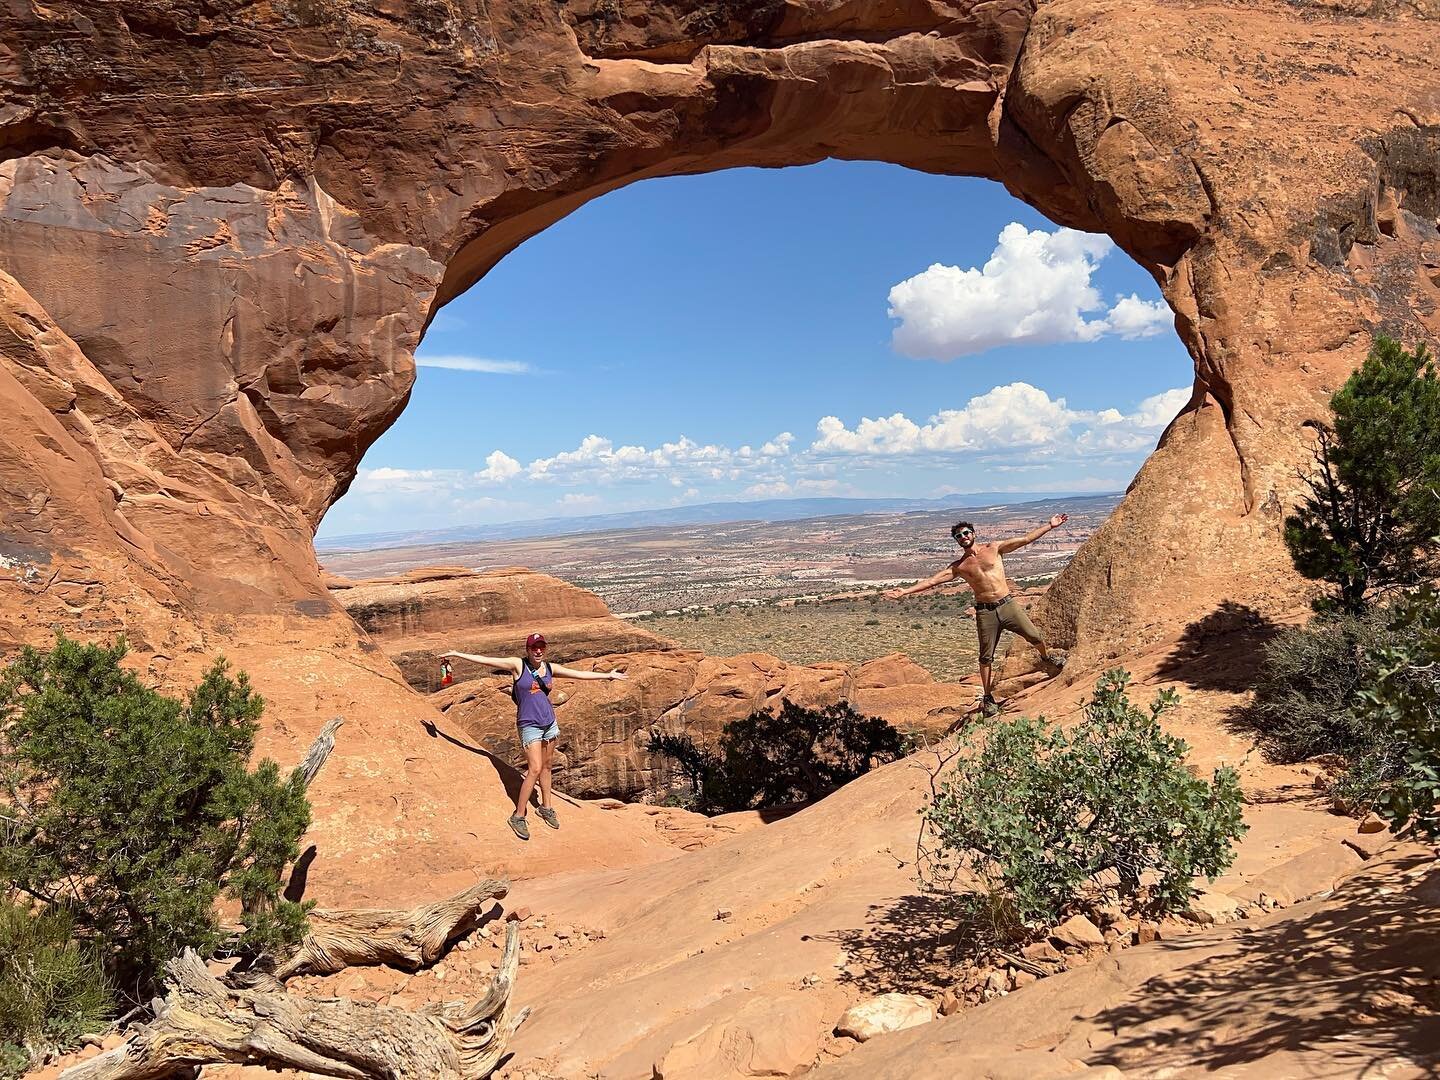 (2/2, Arches!) Welp- we tromp&rsquo;d right out of service for a few days and all we got were these lousy precious memories and photos! 

#archesnationalpark #arches #utah #moab #travel #daysoff #musicians #touringmusicians #explore